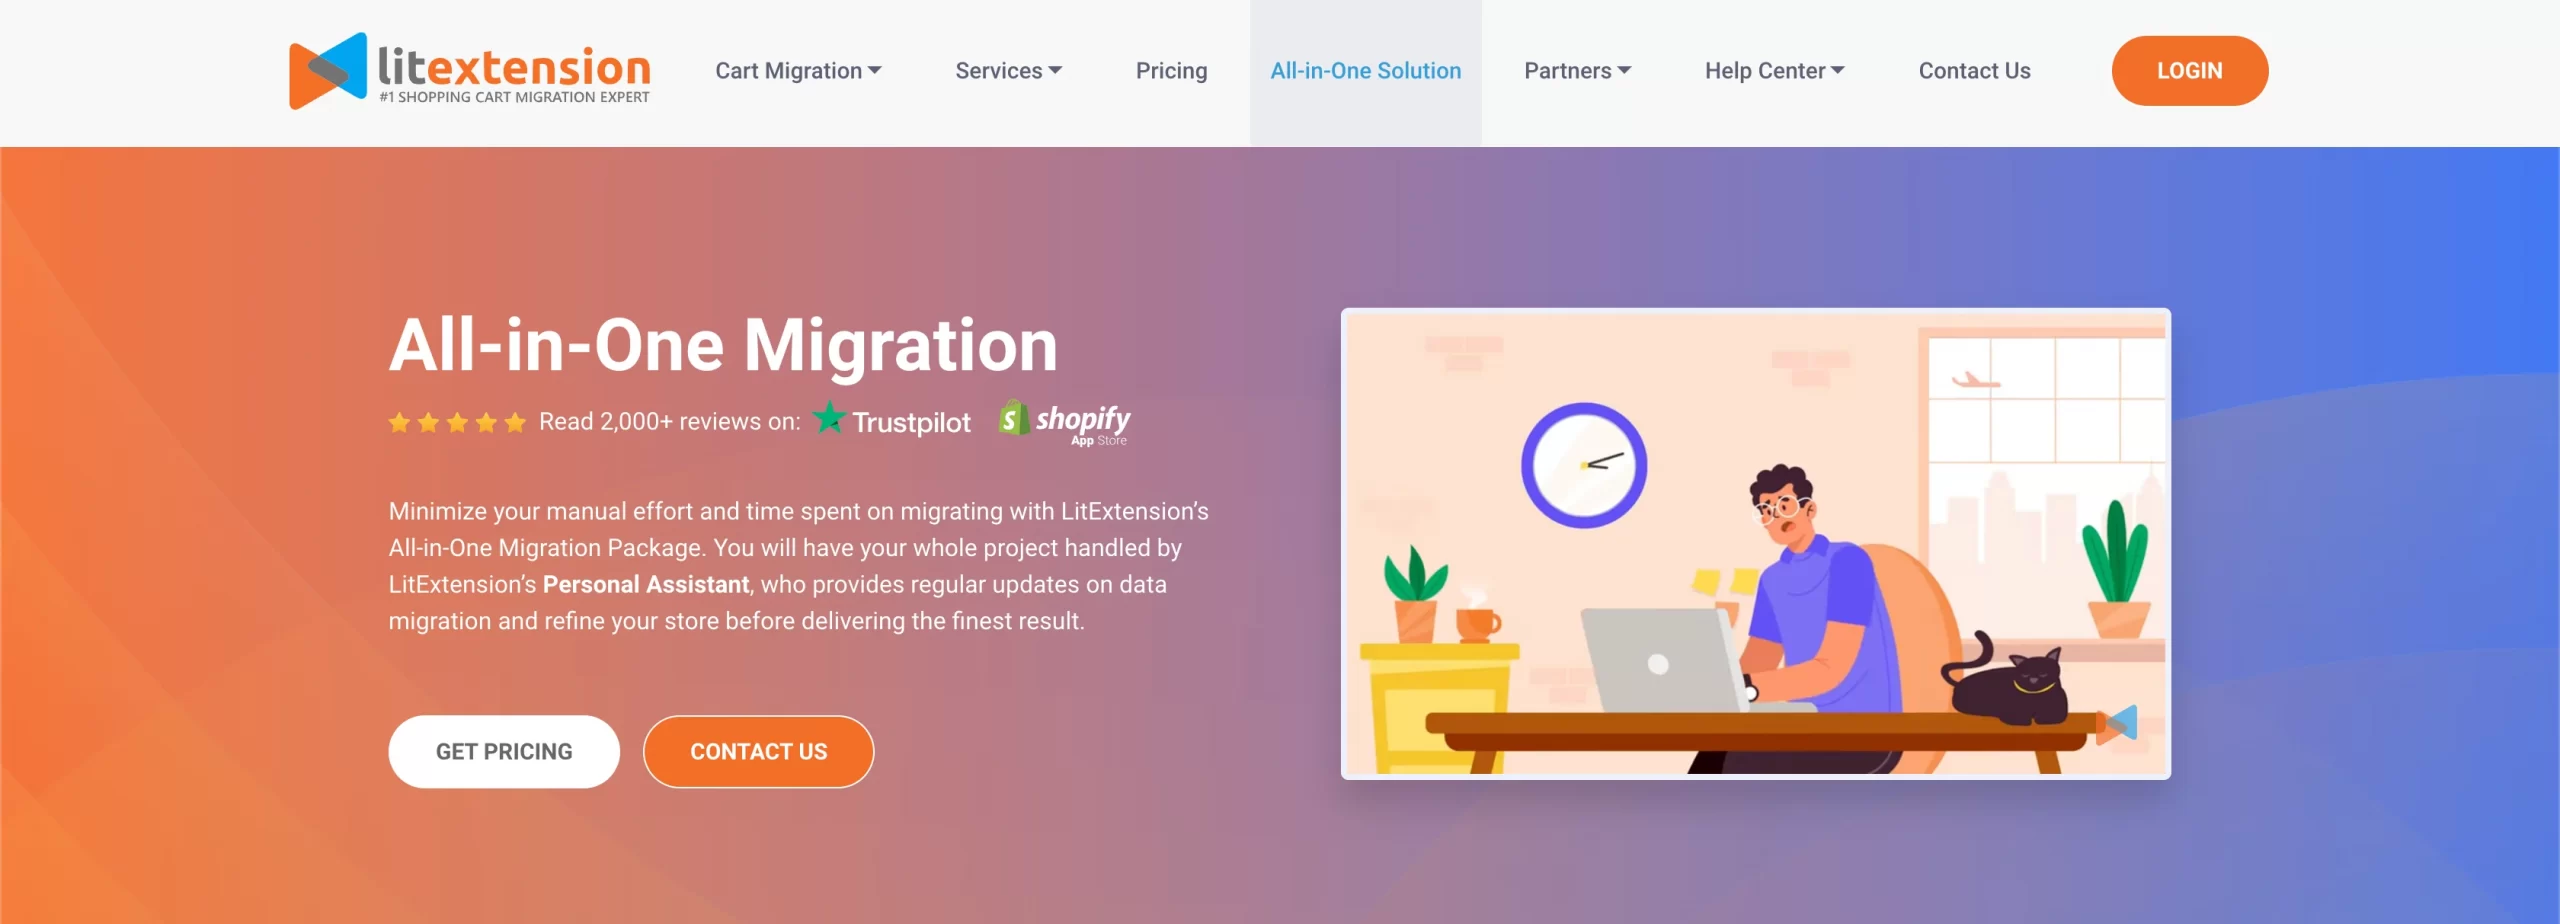 All-In-One migration service from LitExtension